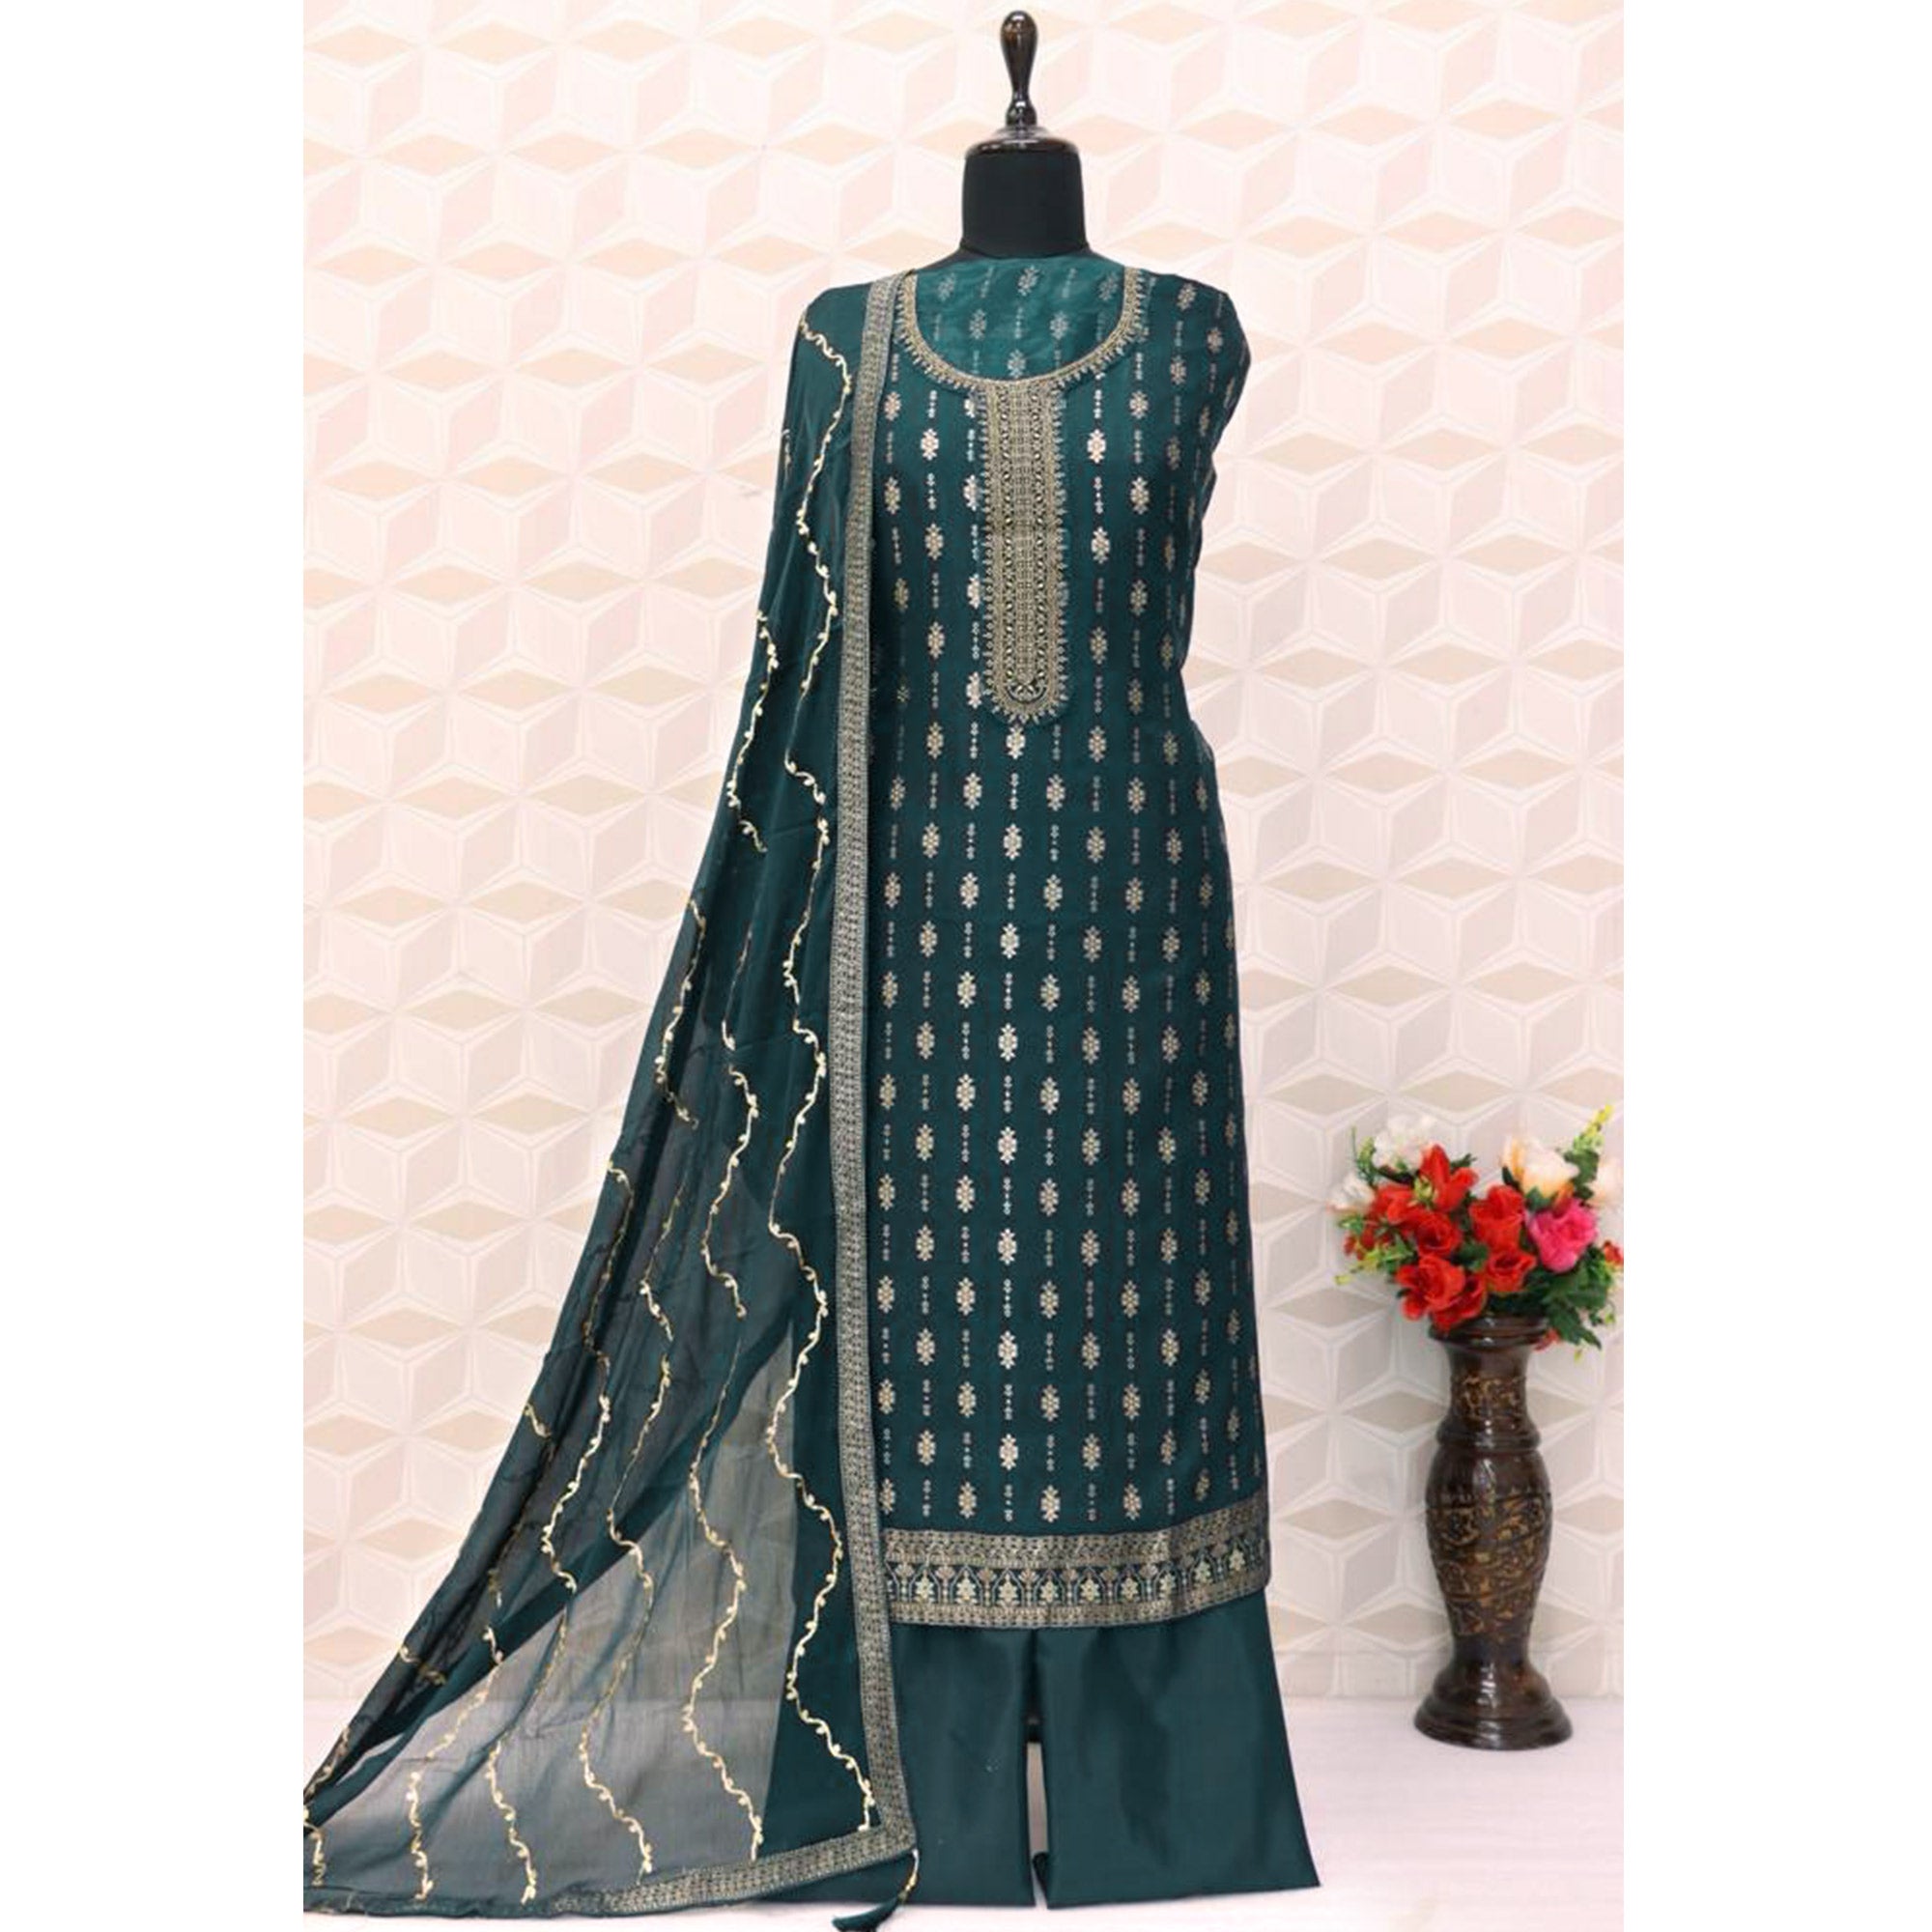 Teal Floral Woven Jacquard Semi Stitched Salwar Suit